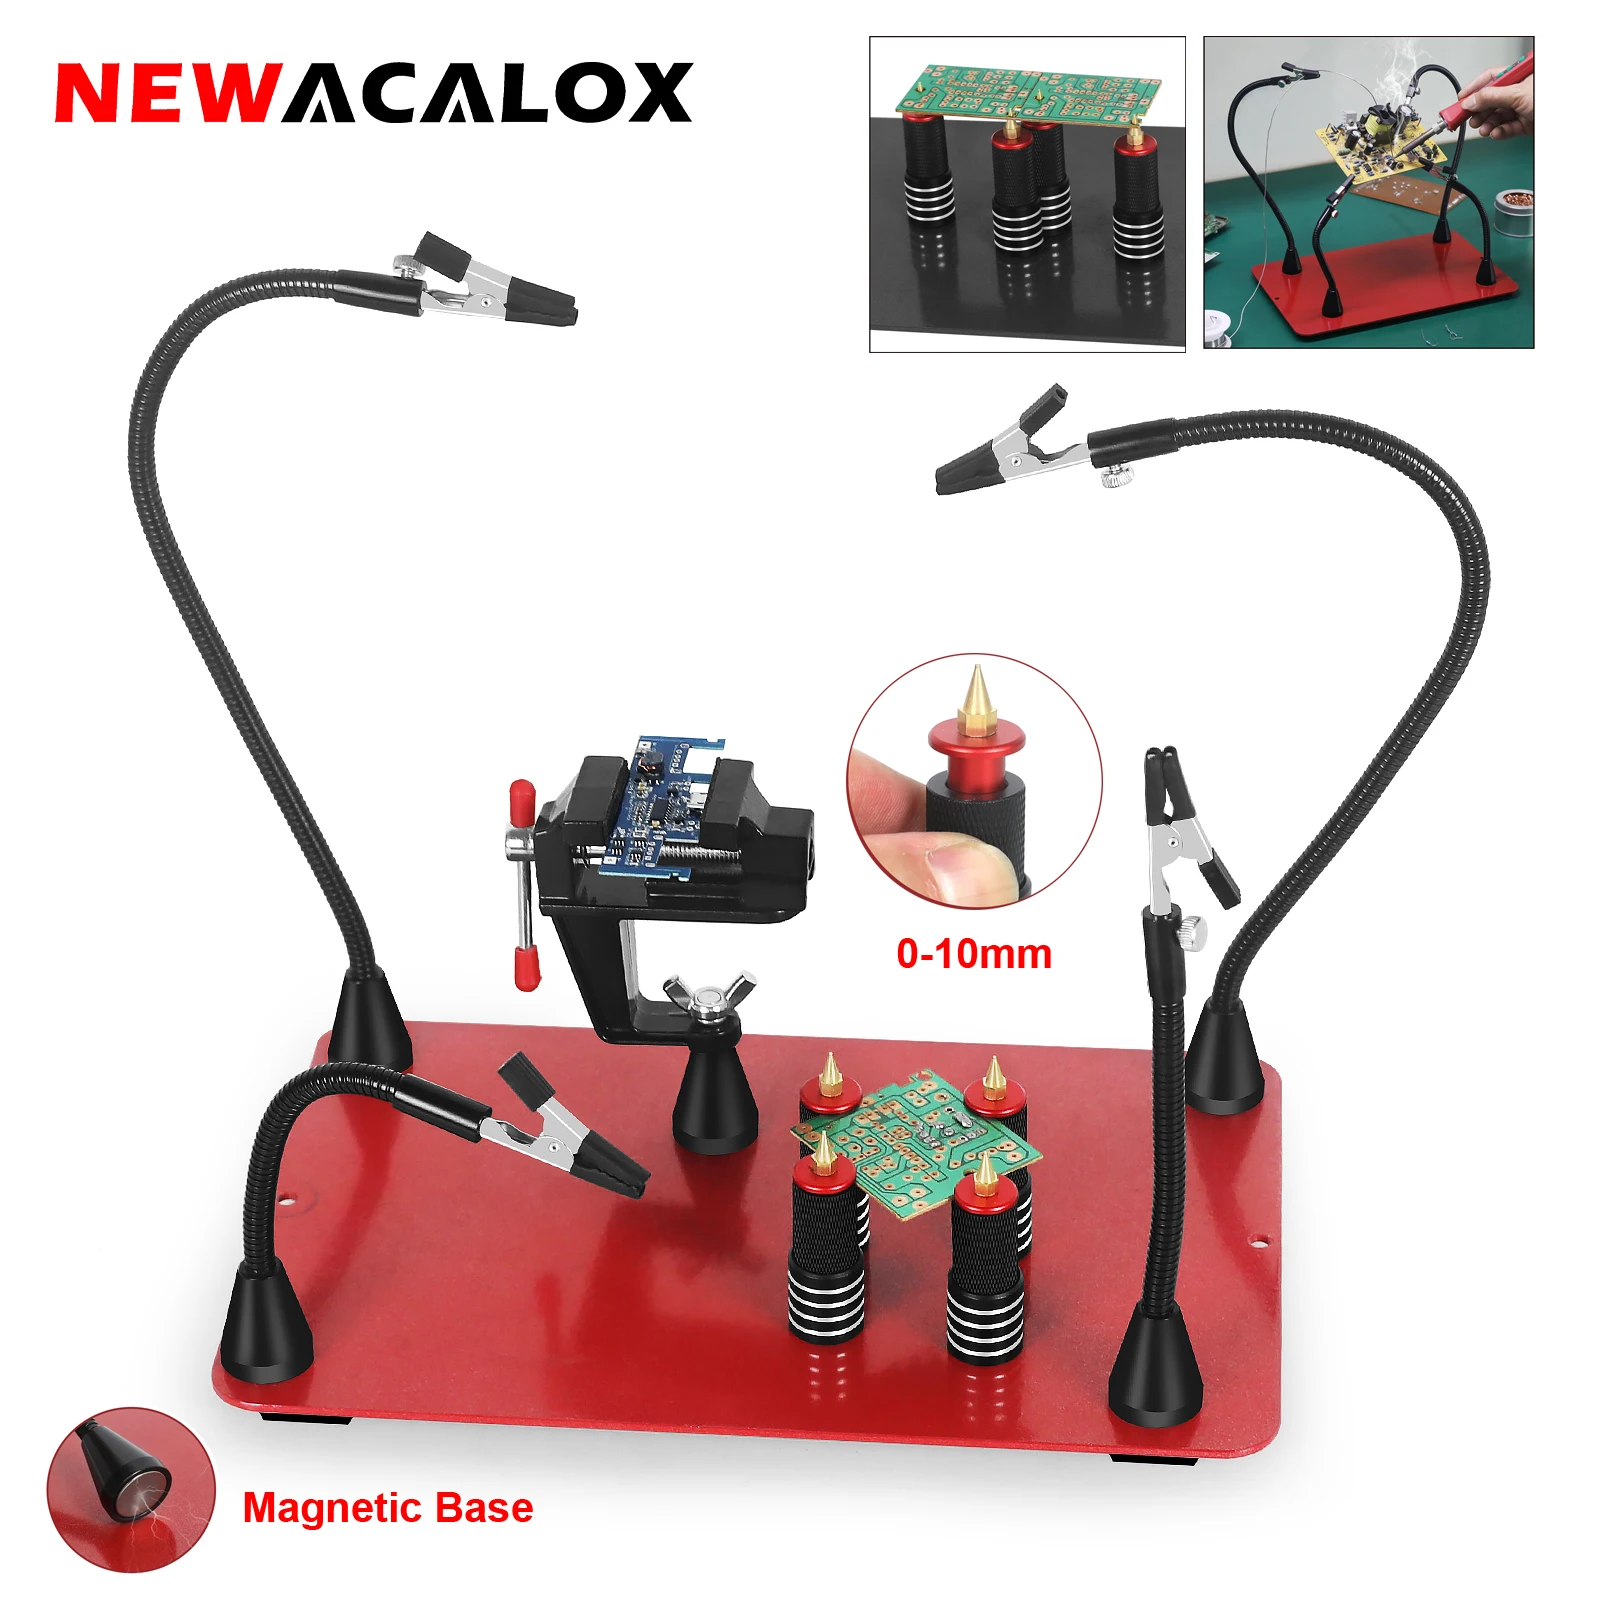 NEWACALOX Soldering Third Hand Tool PCB Holder with Magnetic 4Pcs Flexible Arms Crafts Jewelry Welding Workshop Helping Station